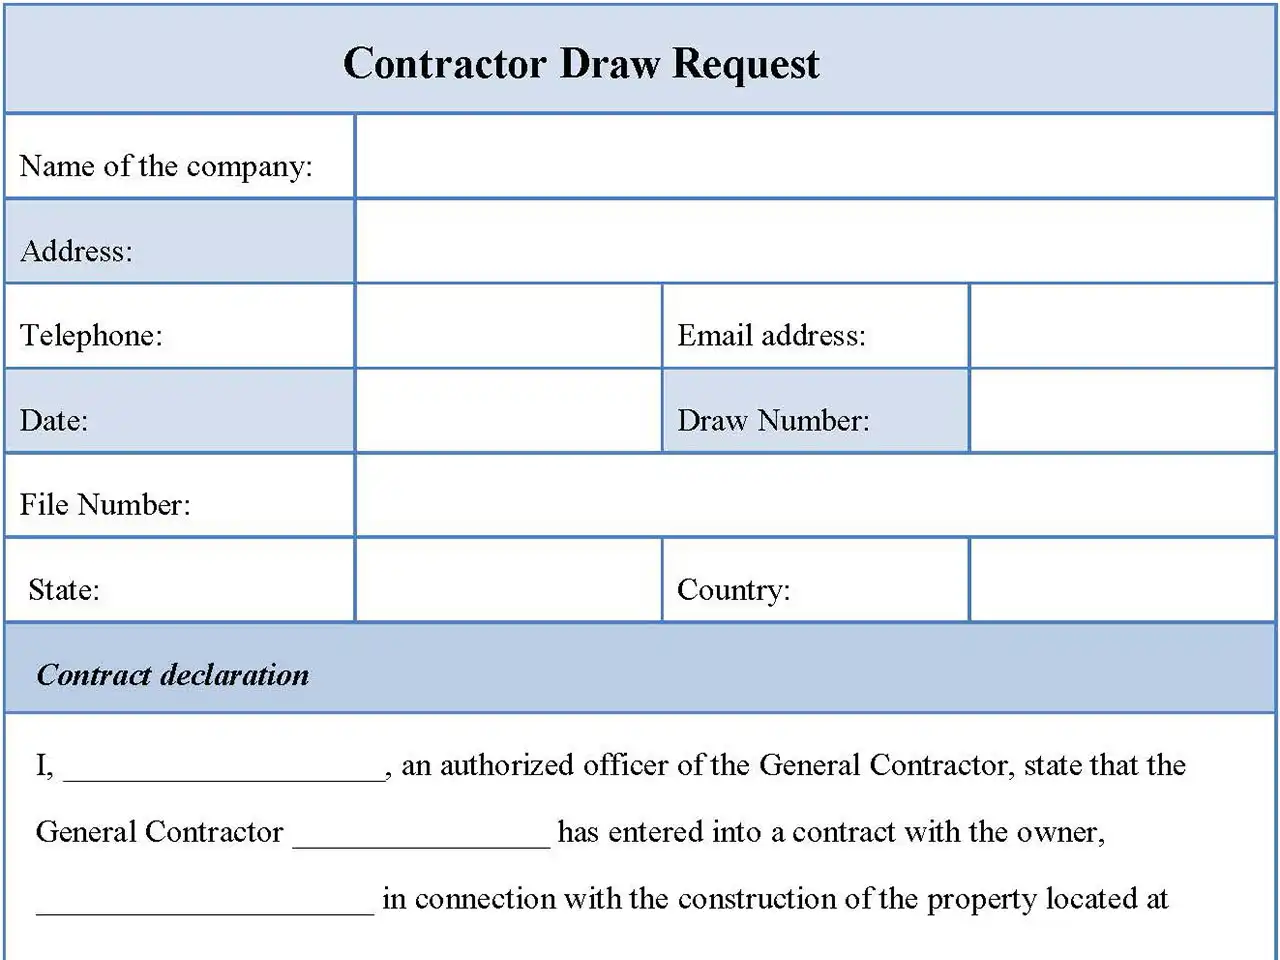 Contractor Draw Request Fillable PDF Form